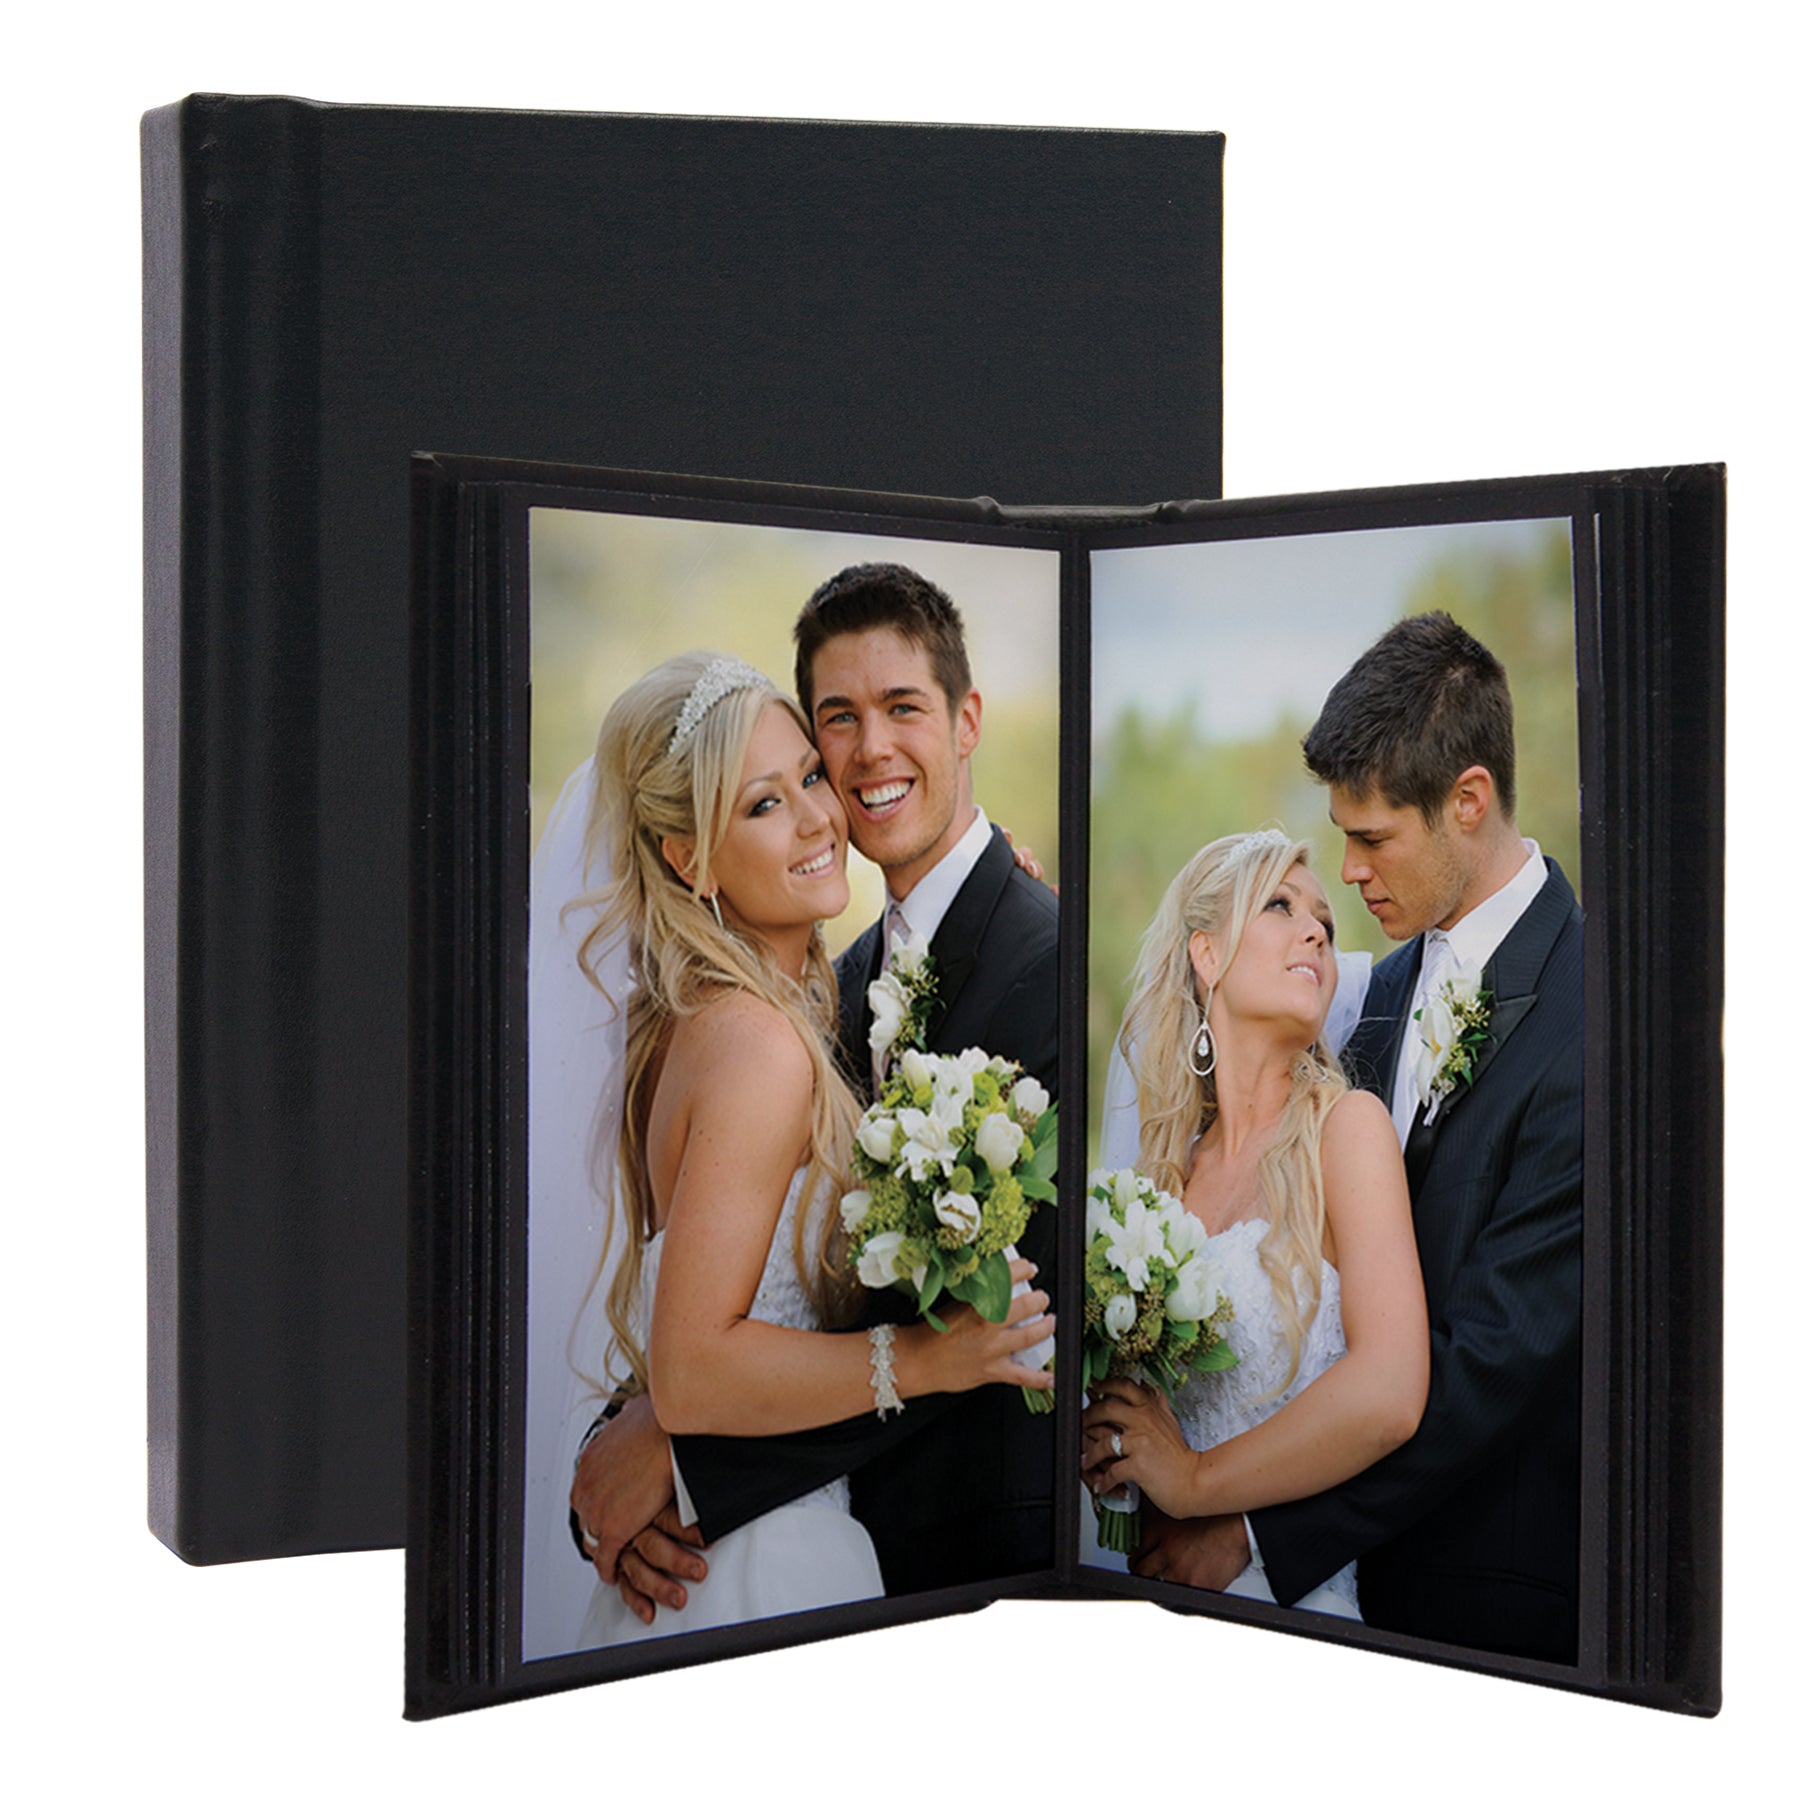 Wholesale 8x10 photo albums Available For Your Trip Down Memory